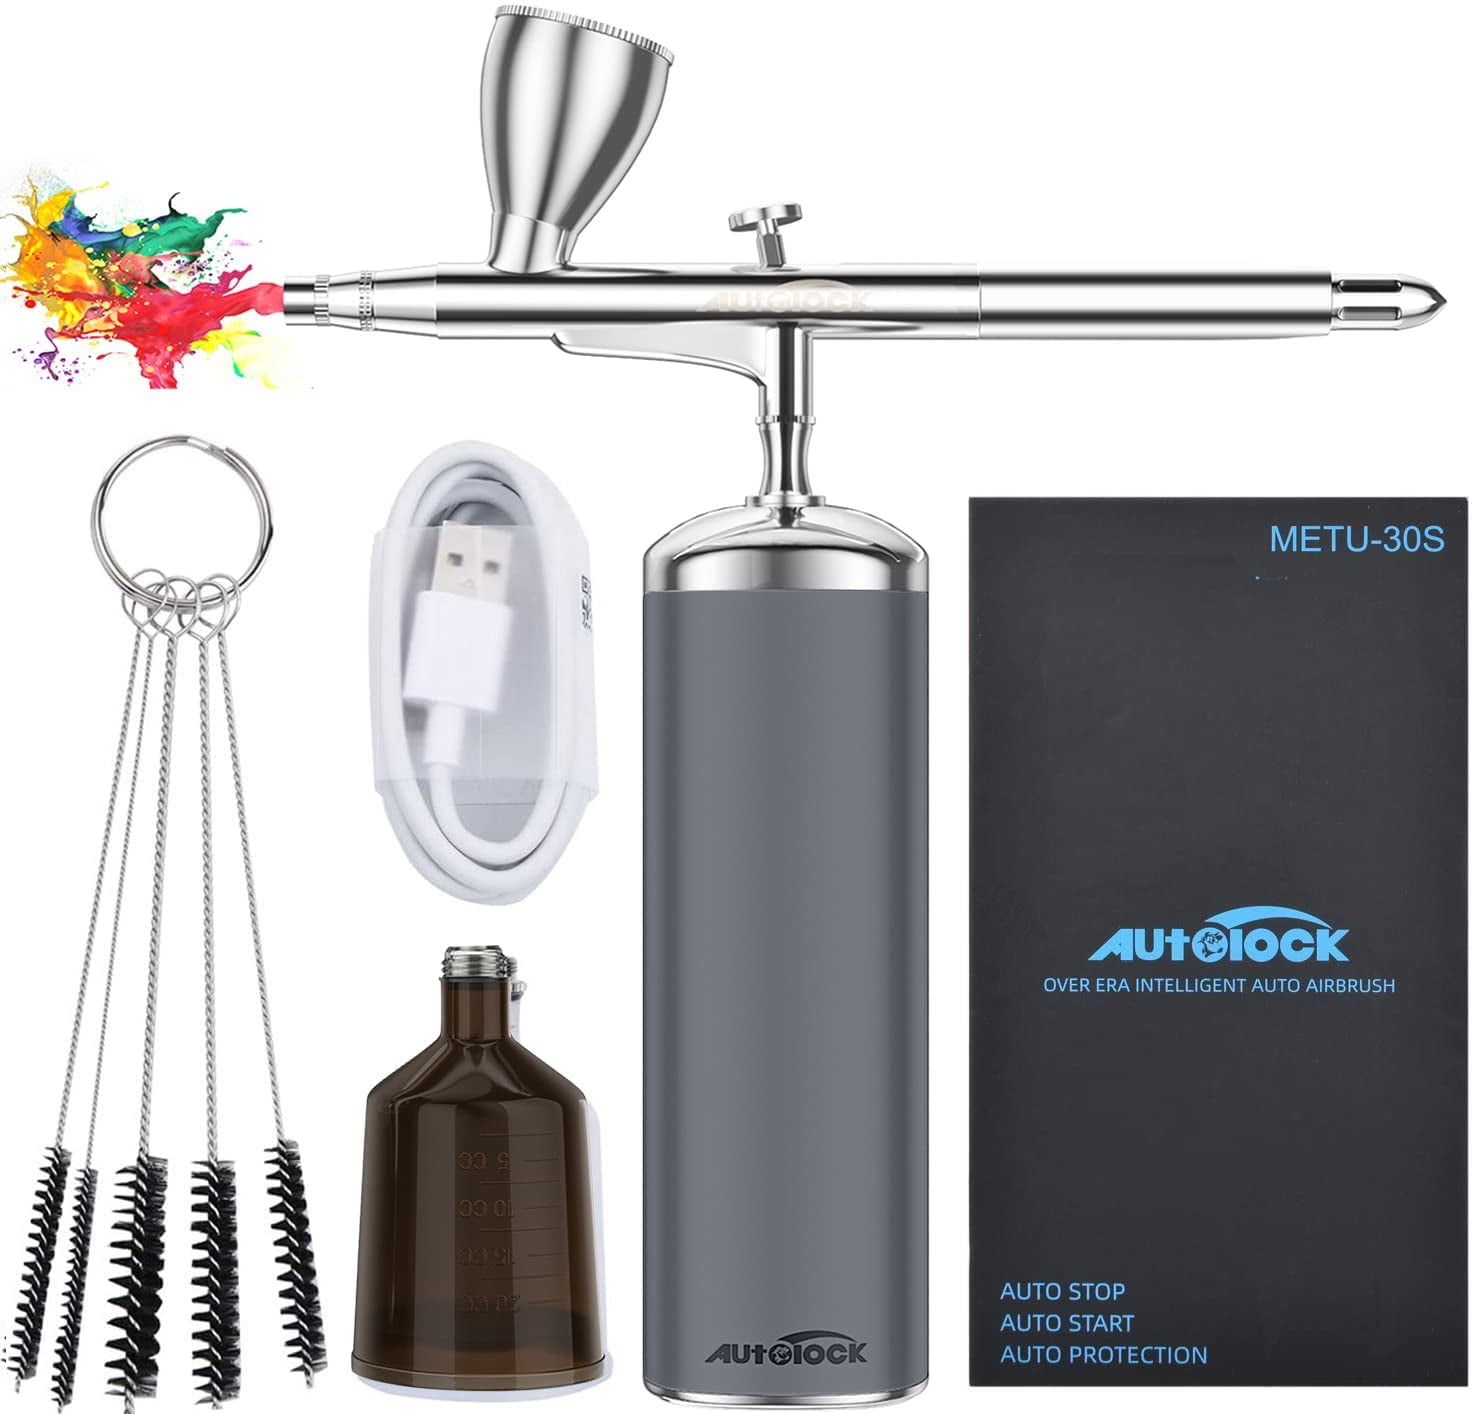 Autolock Upgraded Airbrush Kit with Air Compressor, India